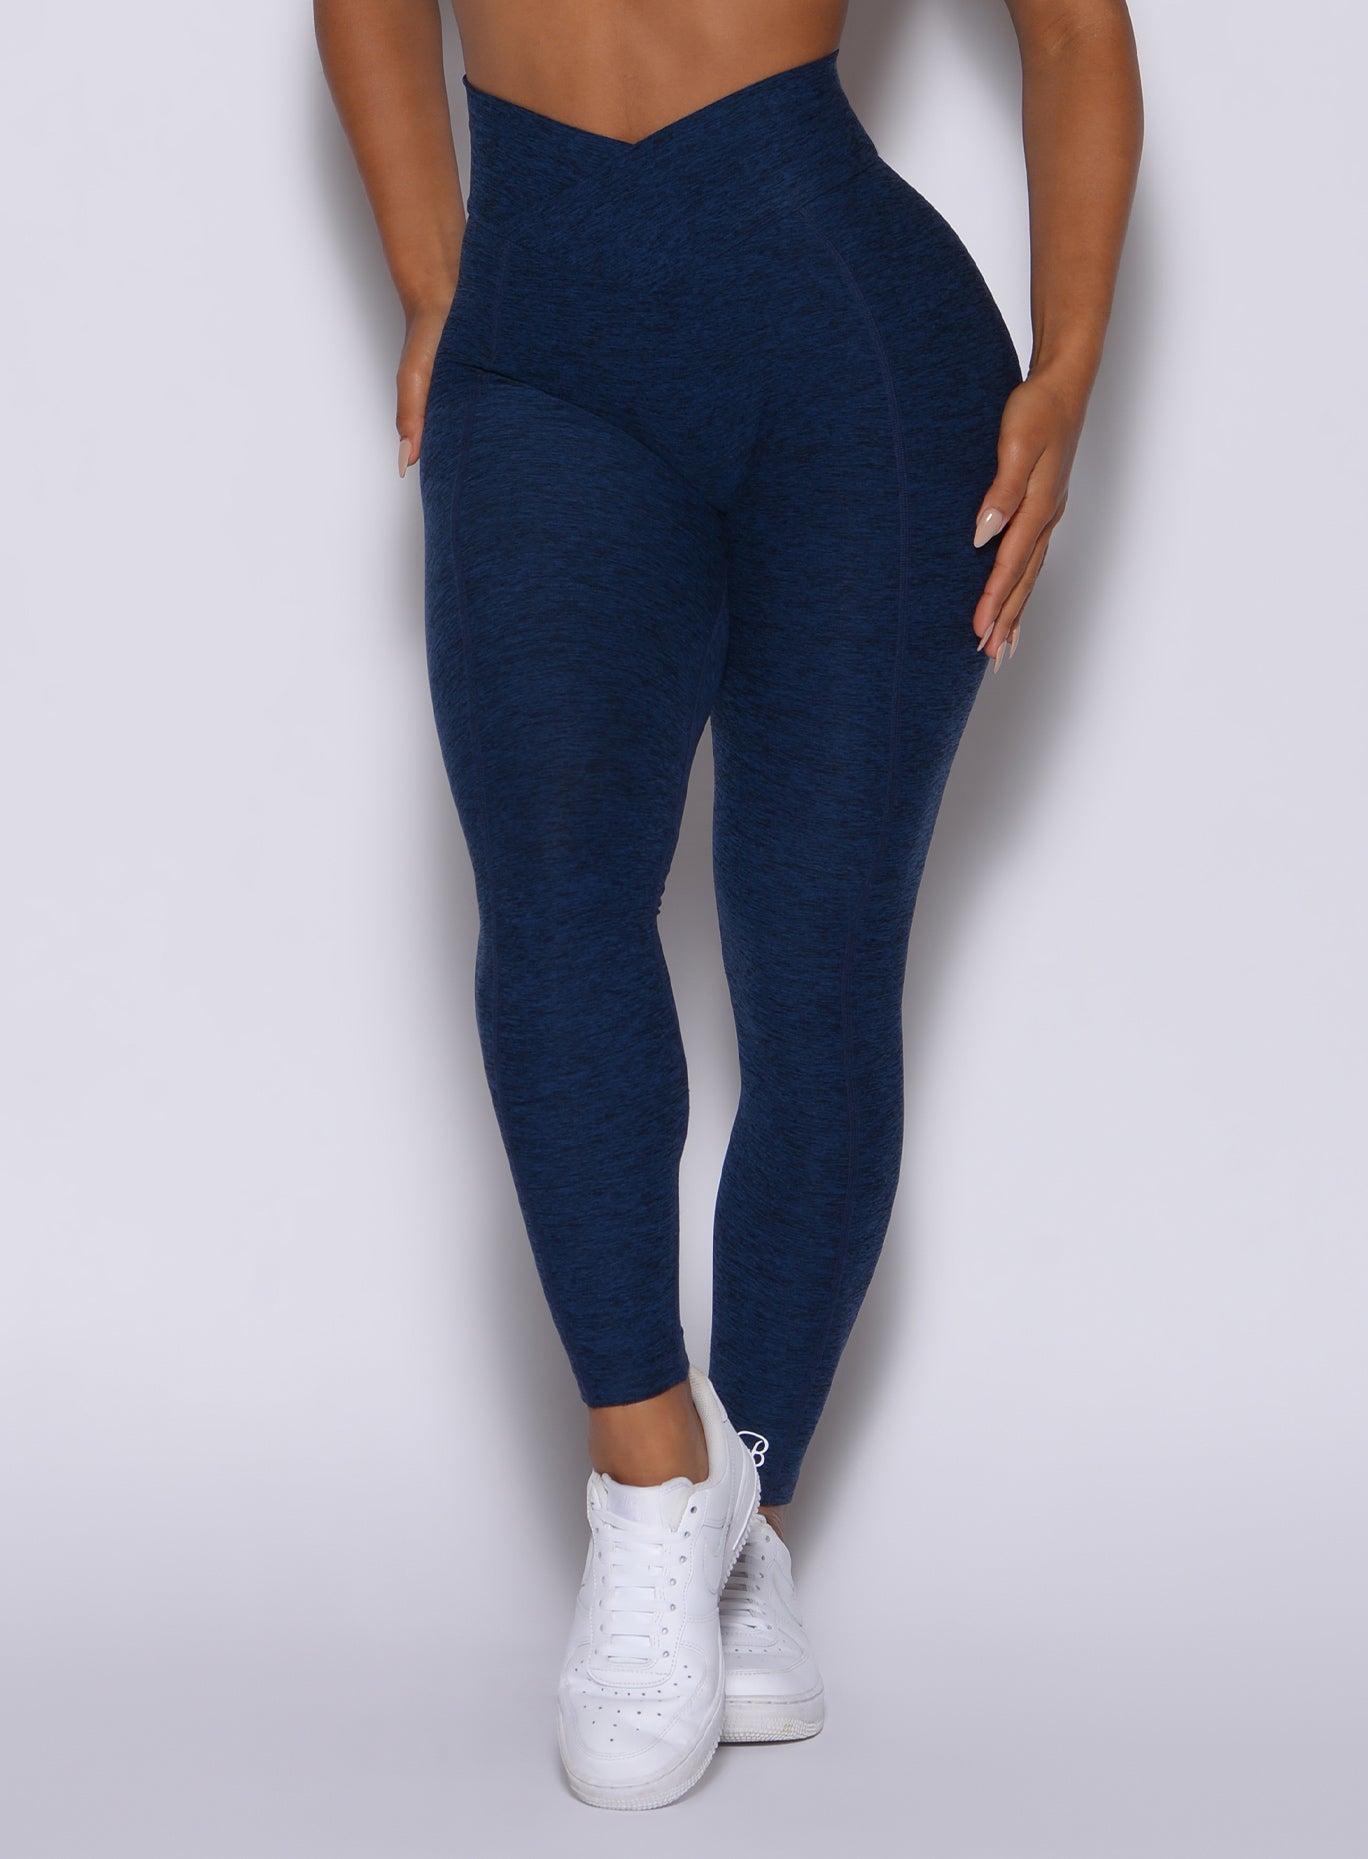 Zoomed in front view of our Brazilian contour leggings in sapphire blue color  